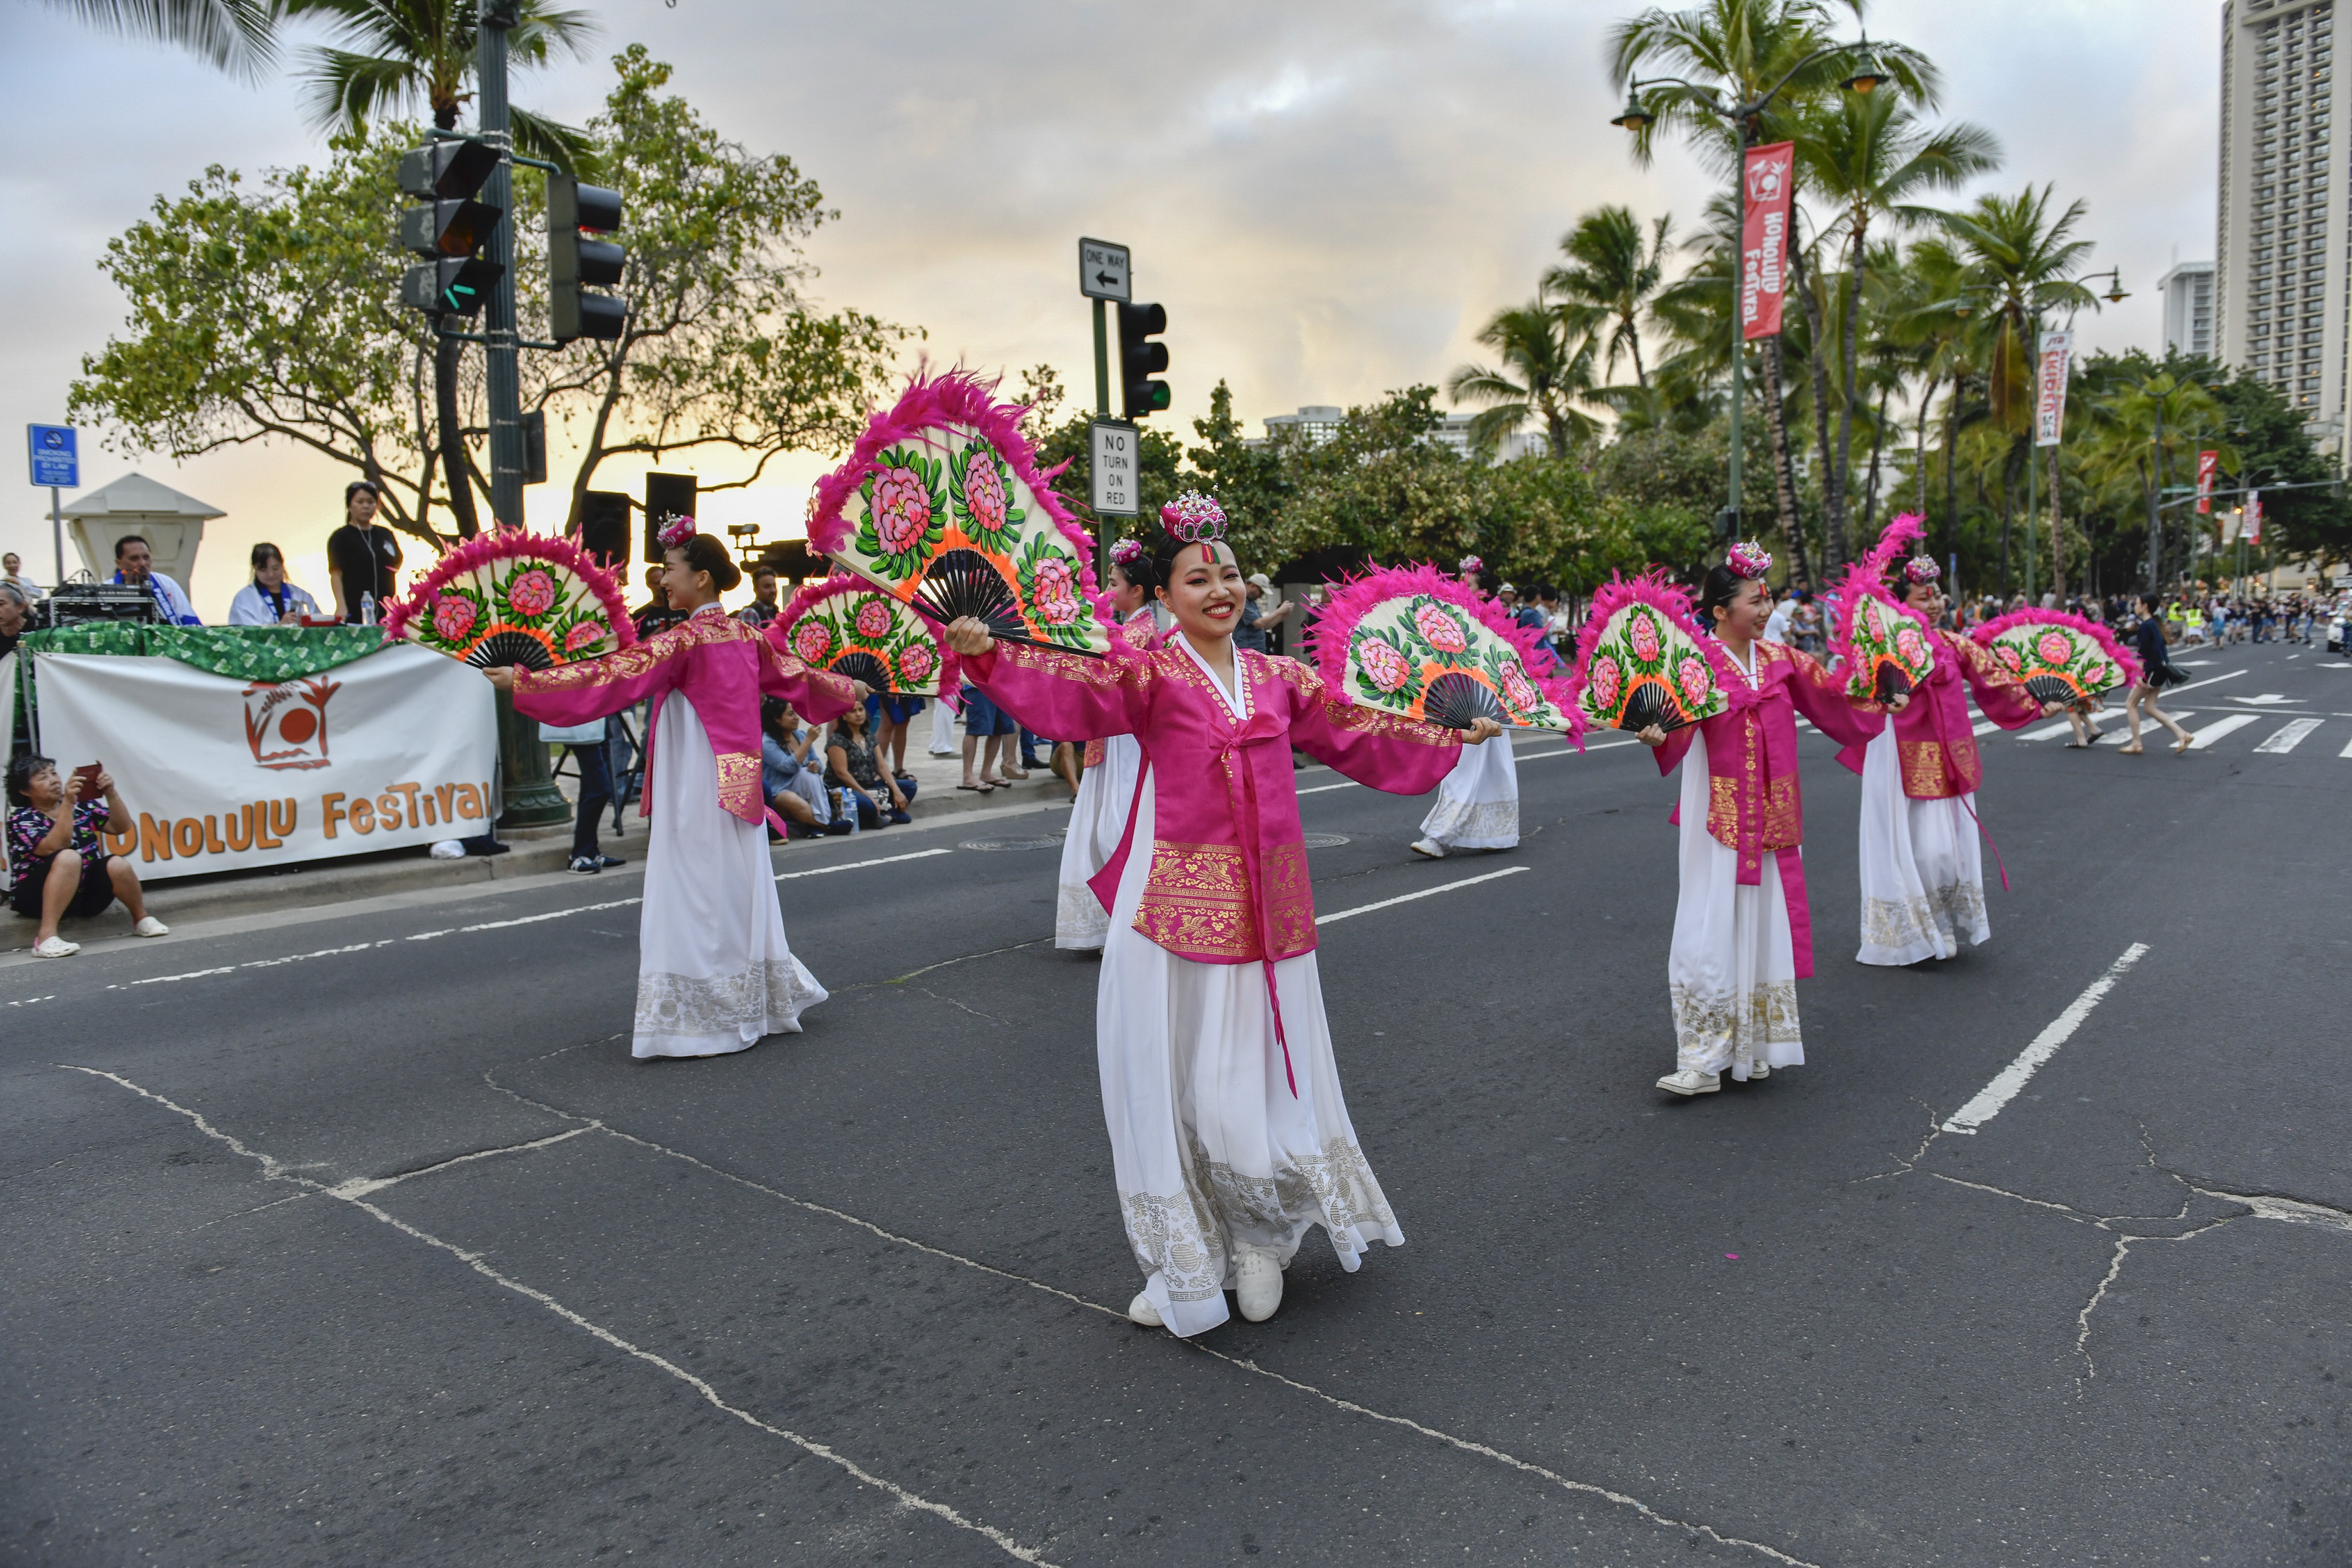 Honolulu Festival to Celebrate Diversity of AsiaPacific Cultures